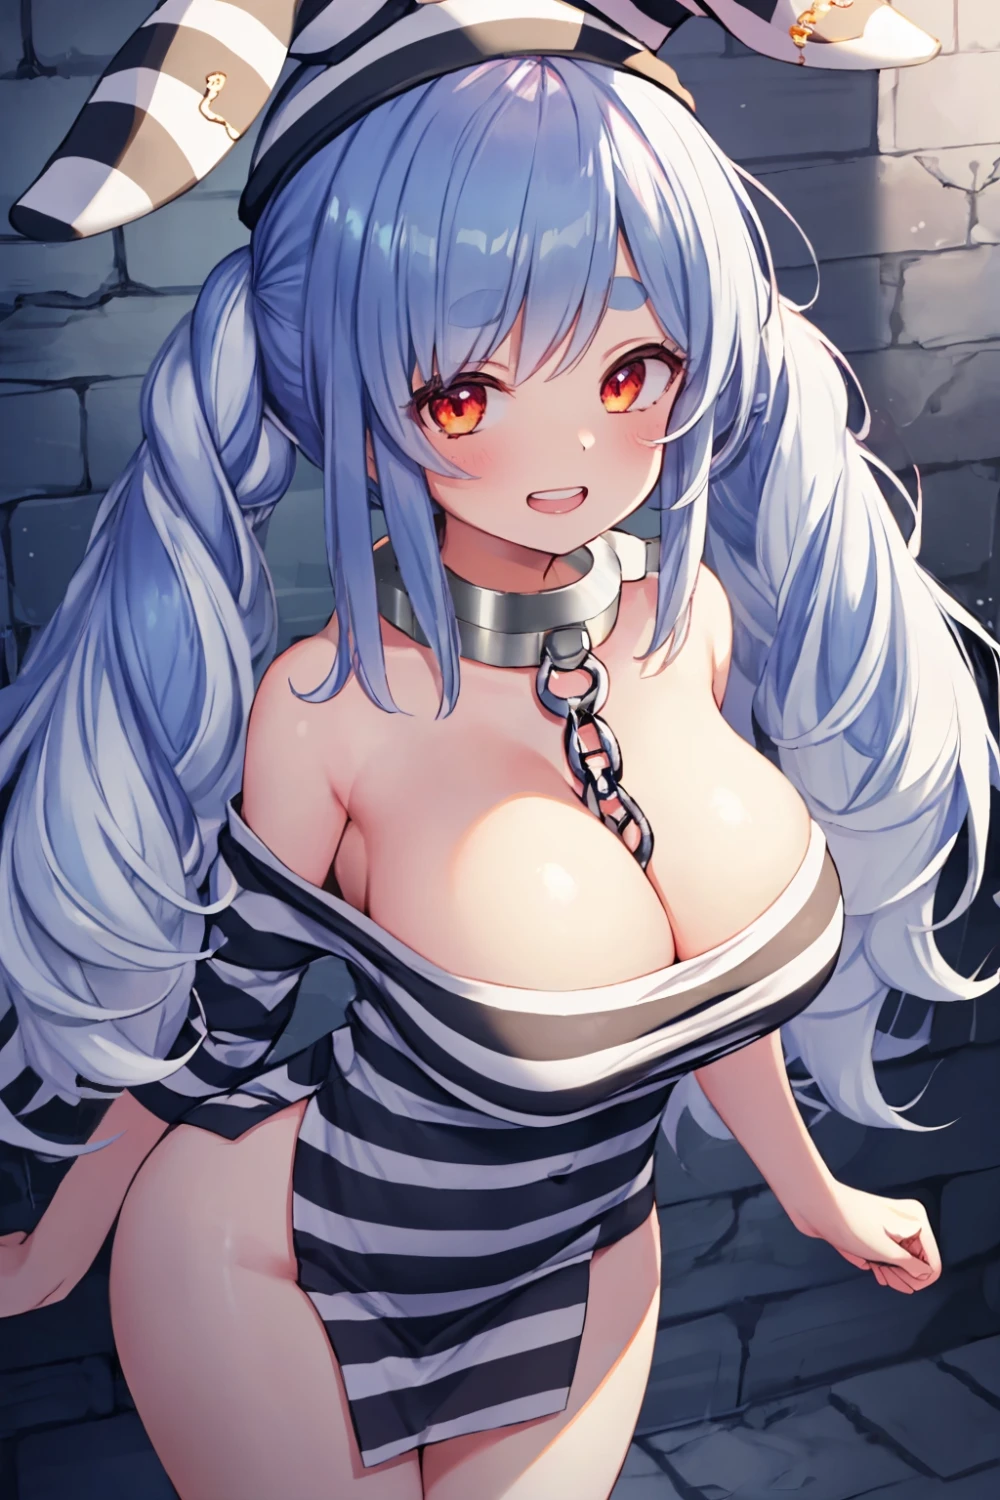 cleavage-anime-style-all-ages-21